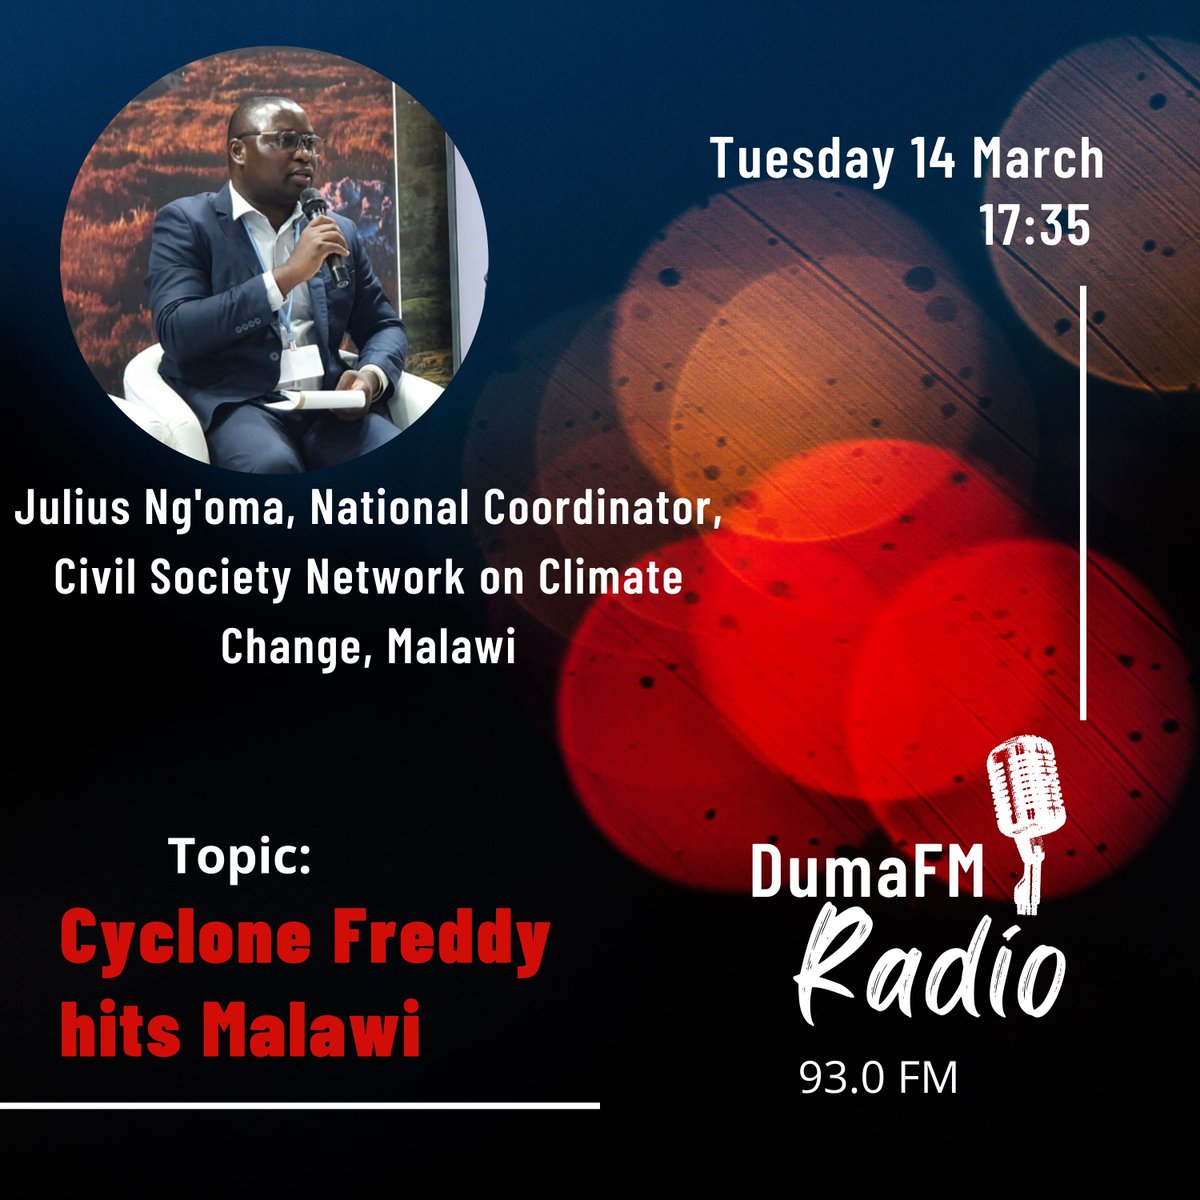 Tune in to #DumaFM tomorrow, Tuesday 14 March 2023 at 17:35 GMT+2 as Mr Julius Ng'oma ffrom the Civil Society Network on Climate Change at Malawi discusses #CycloneFreddy effects, loss and damage and other updates of this #tropicalcyclone

#climatechange #lossanddamage #flooding